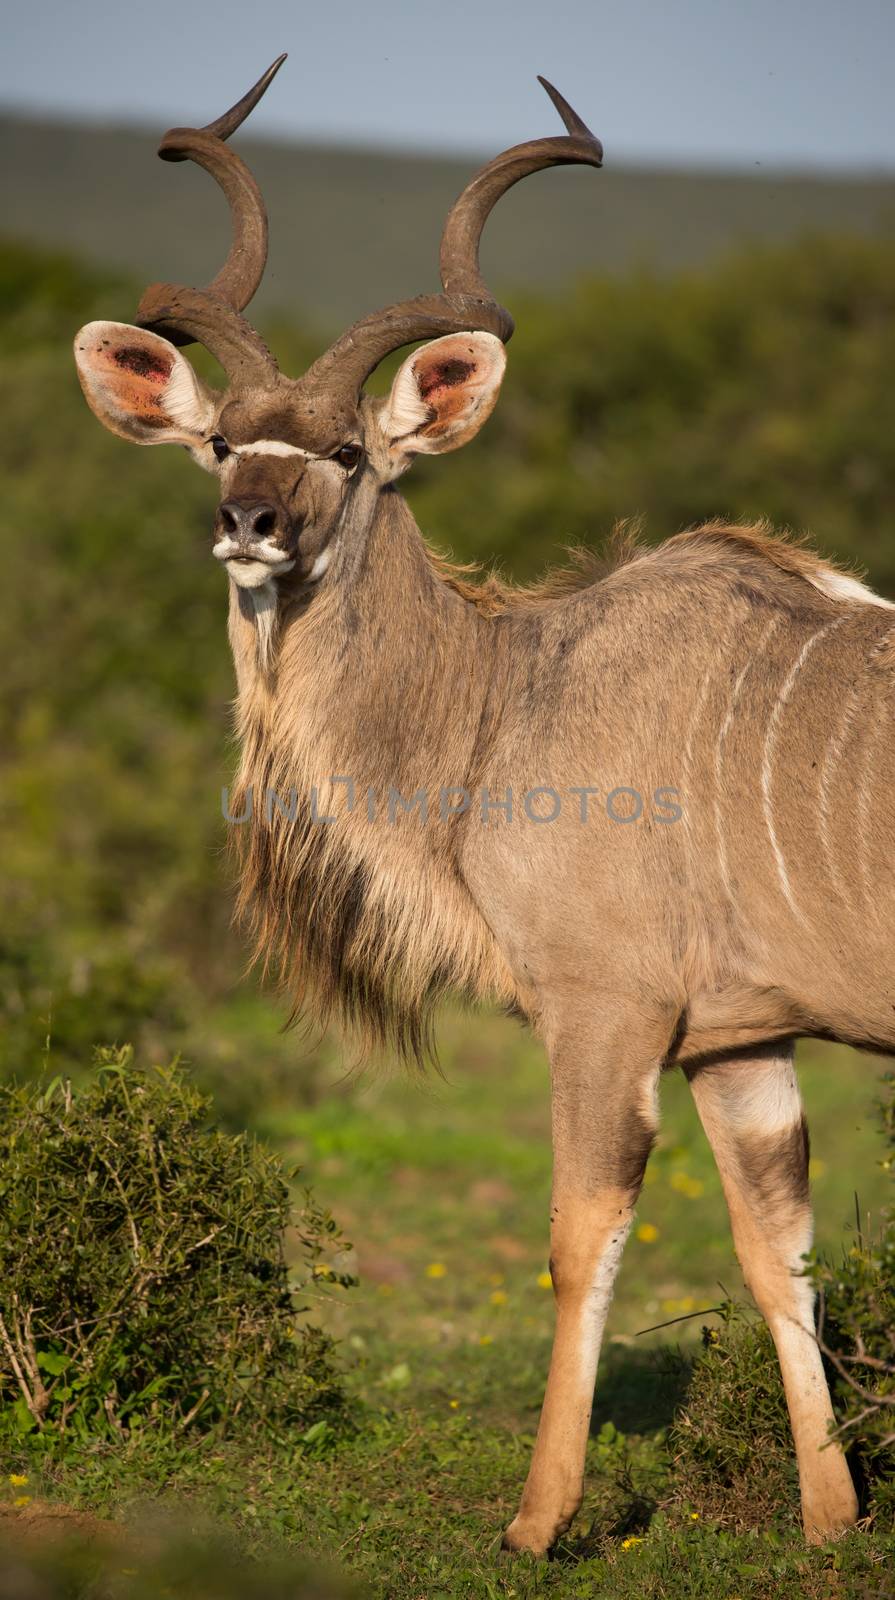 Male Kudu Antelope with Long Horns by fouroaks